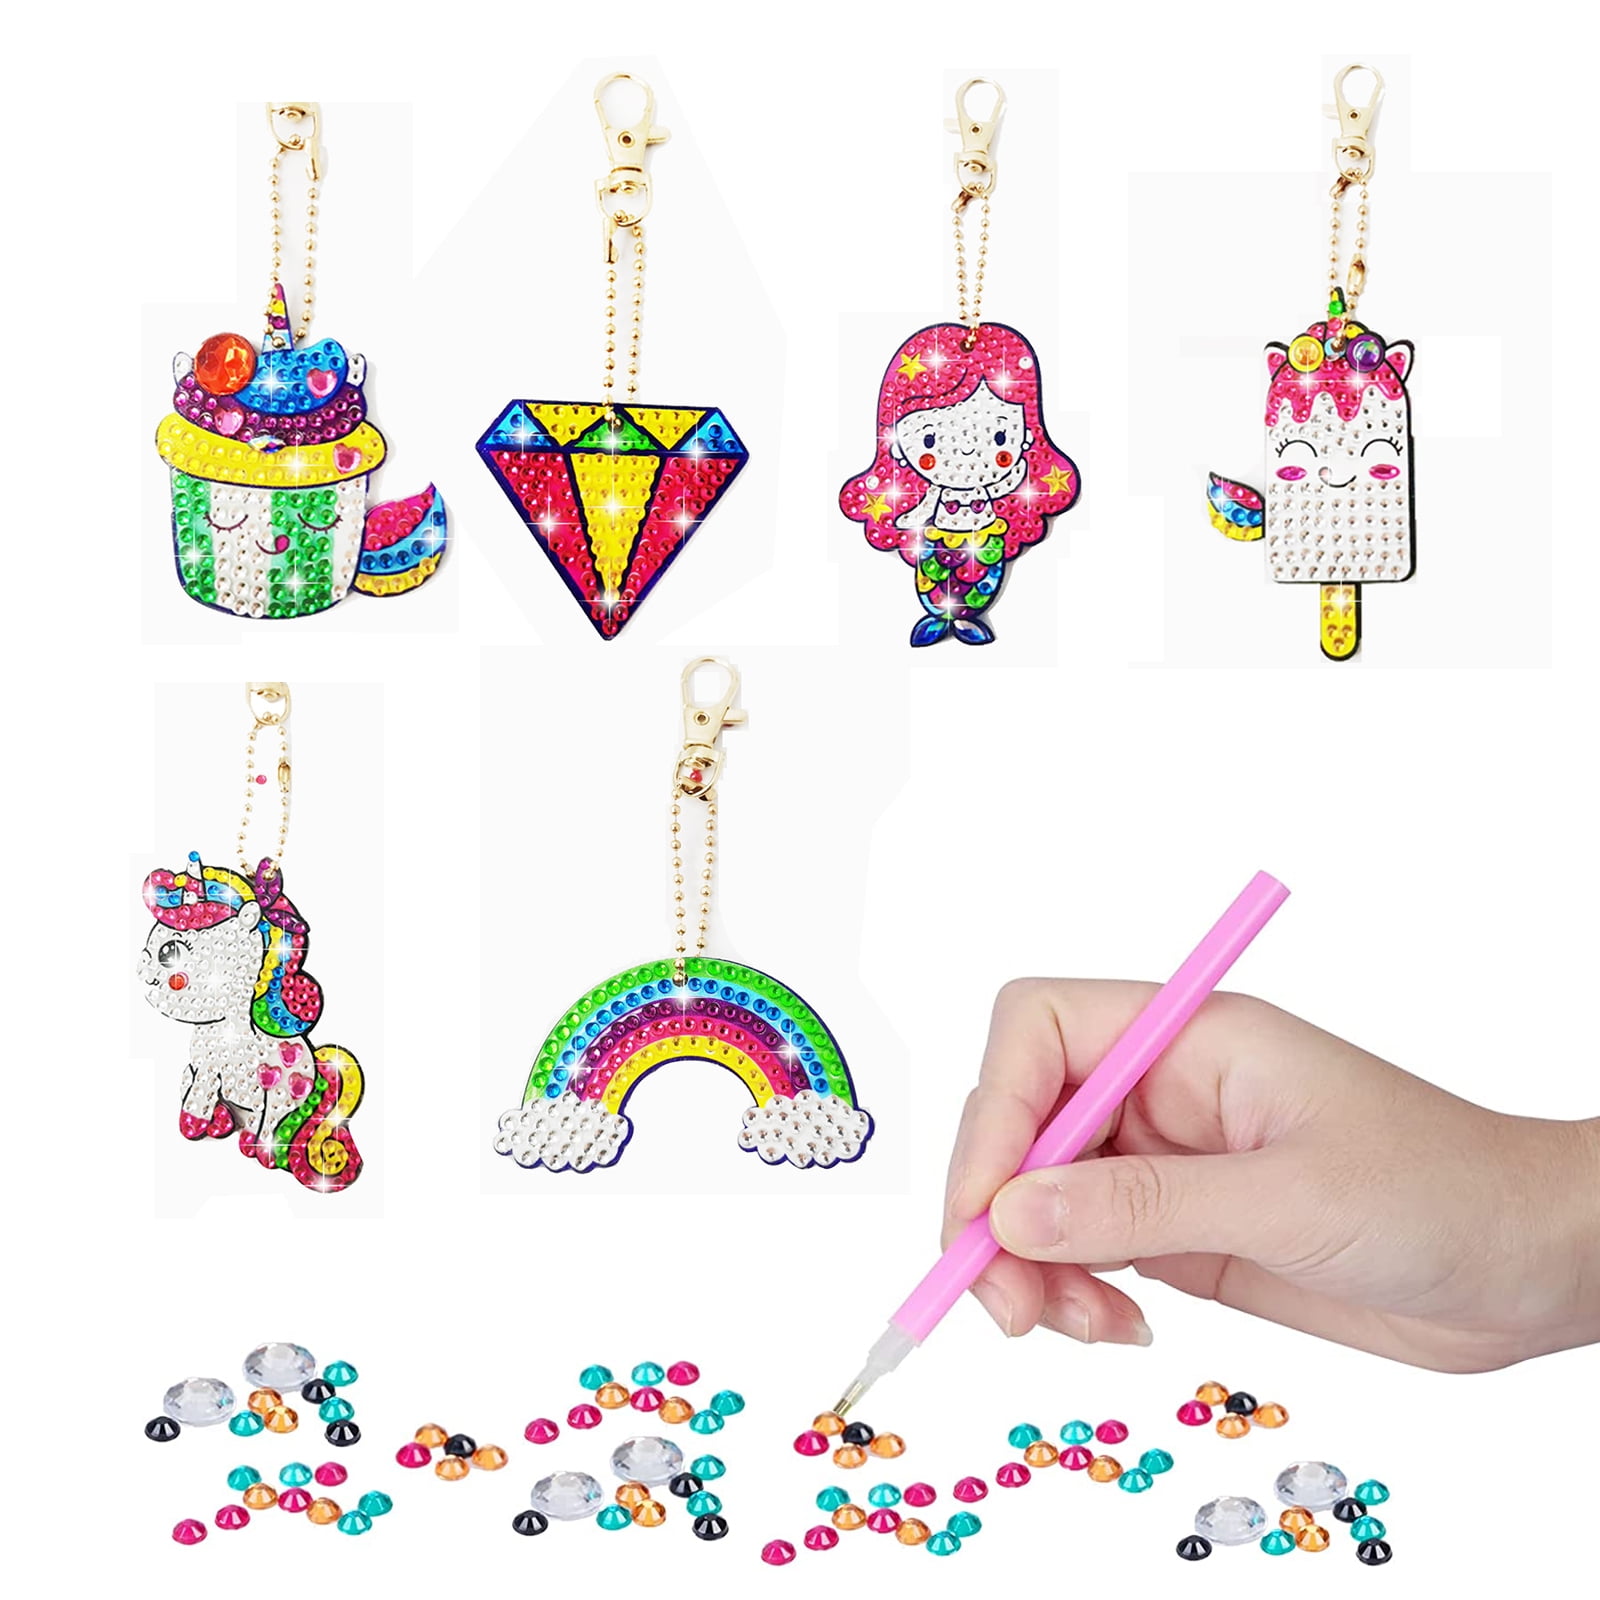 MTLEE 10 Sets Arts and Crafts for Kids Ages 8-12 5D Diamond Painting  Keychain Kits Gem Art Kits for Girls Crafts Gem Painting Kits Diamond Art  Gift Idea for Age 4, 5, 6, 7, 8, 9, 10-12 - Yahoo Shopping